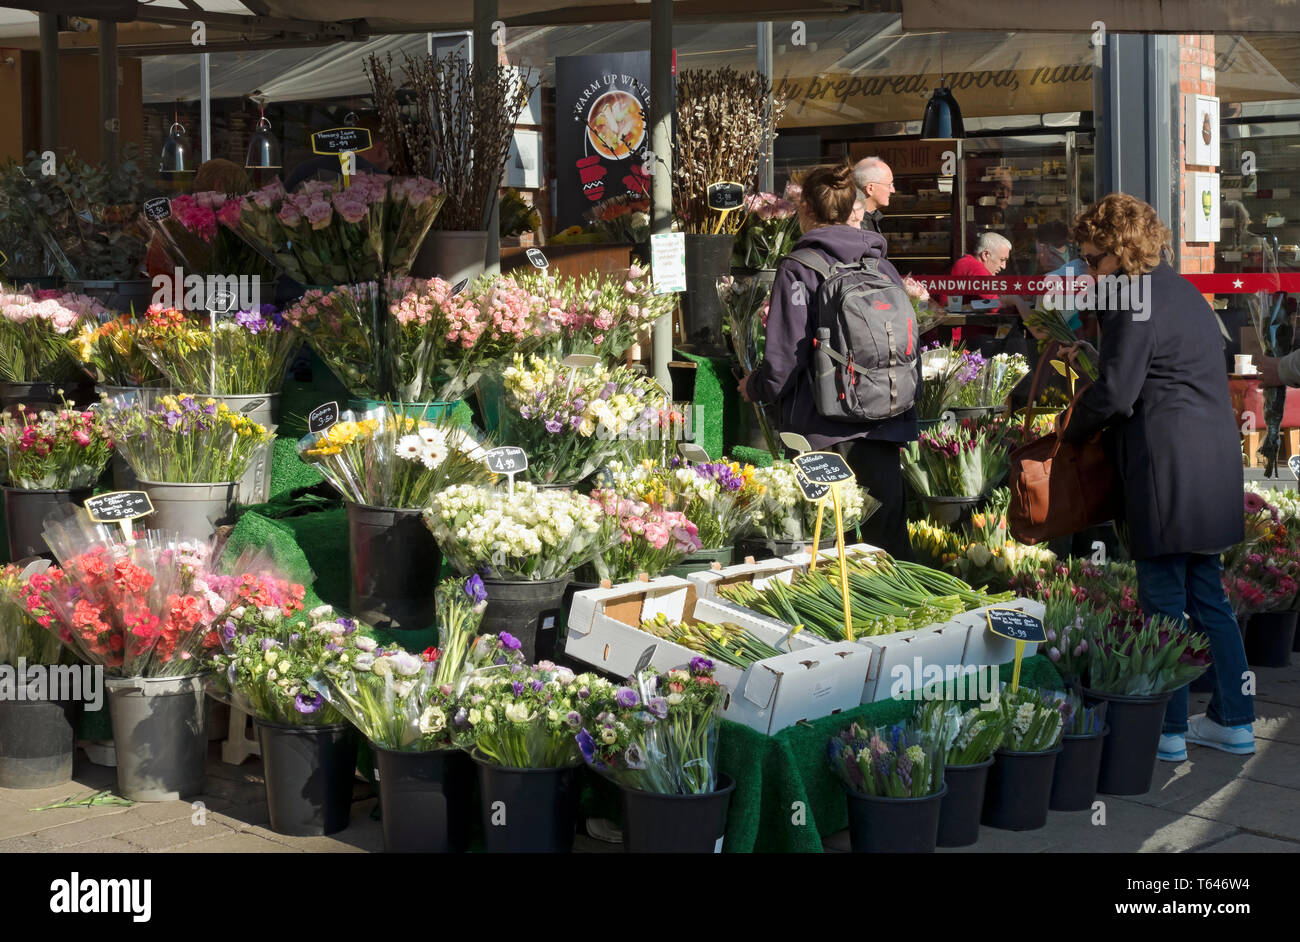 Fresh flowers for sale on outdoor market stall in the city town centre York North Yorkshire England UK United Kingdom GB Great Britain Stock Photo